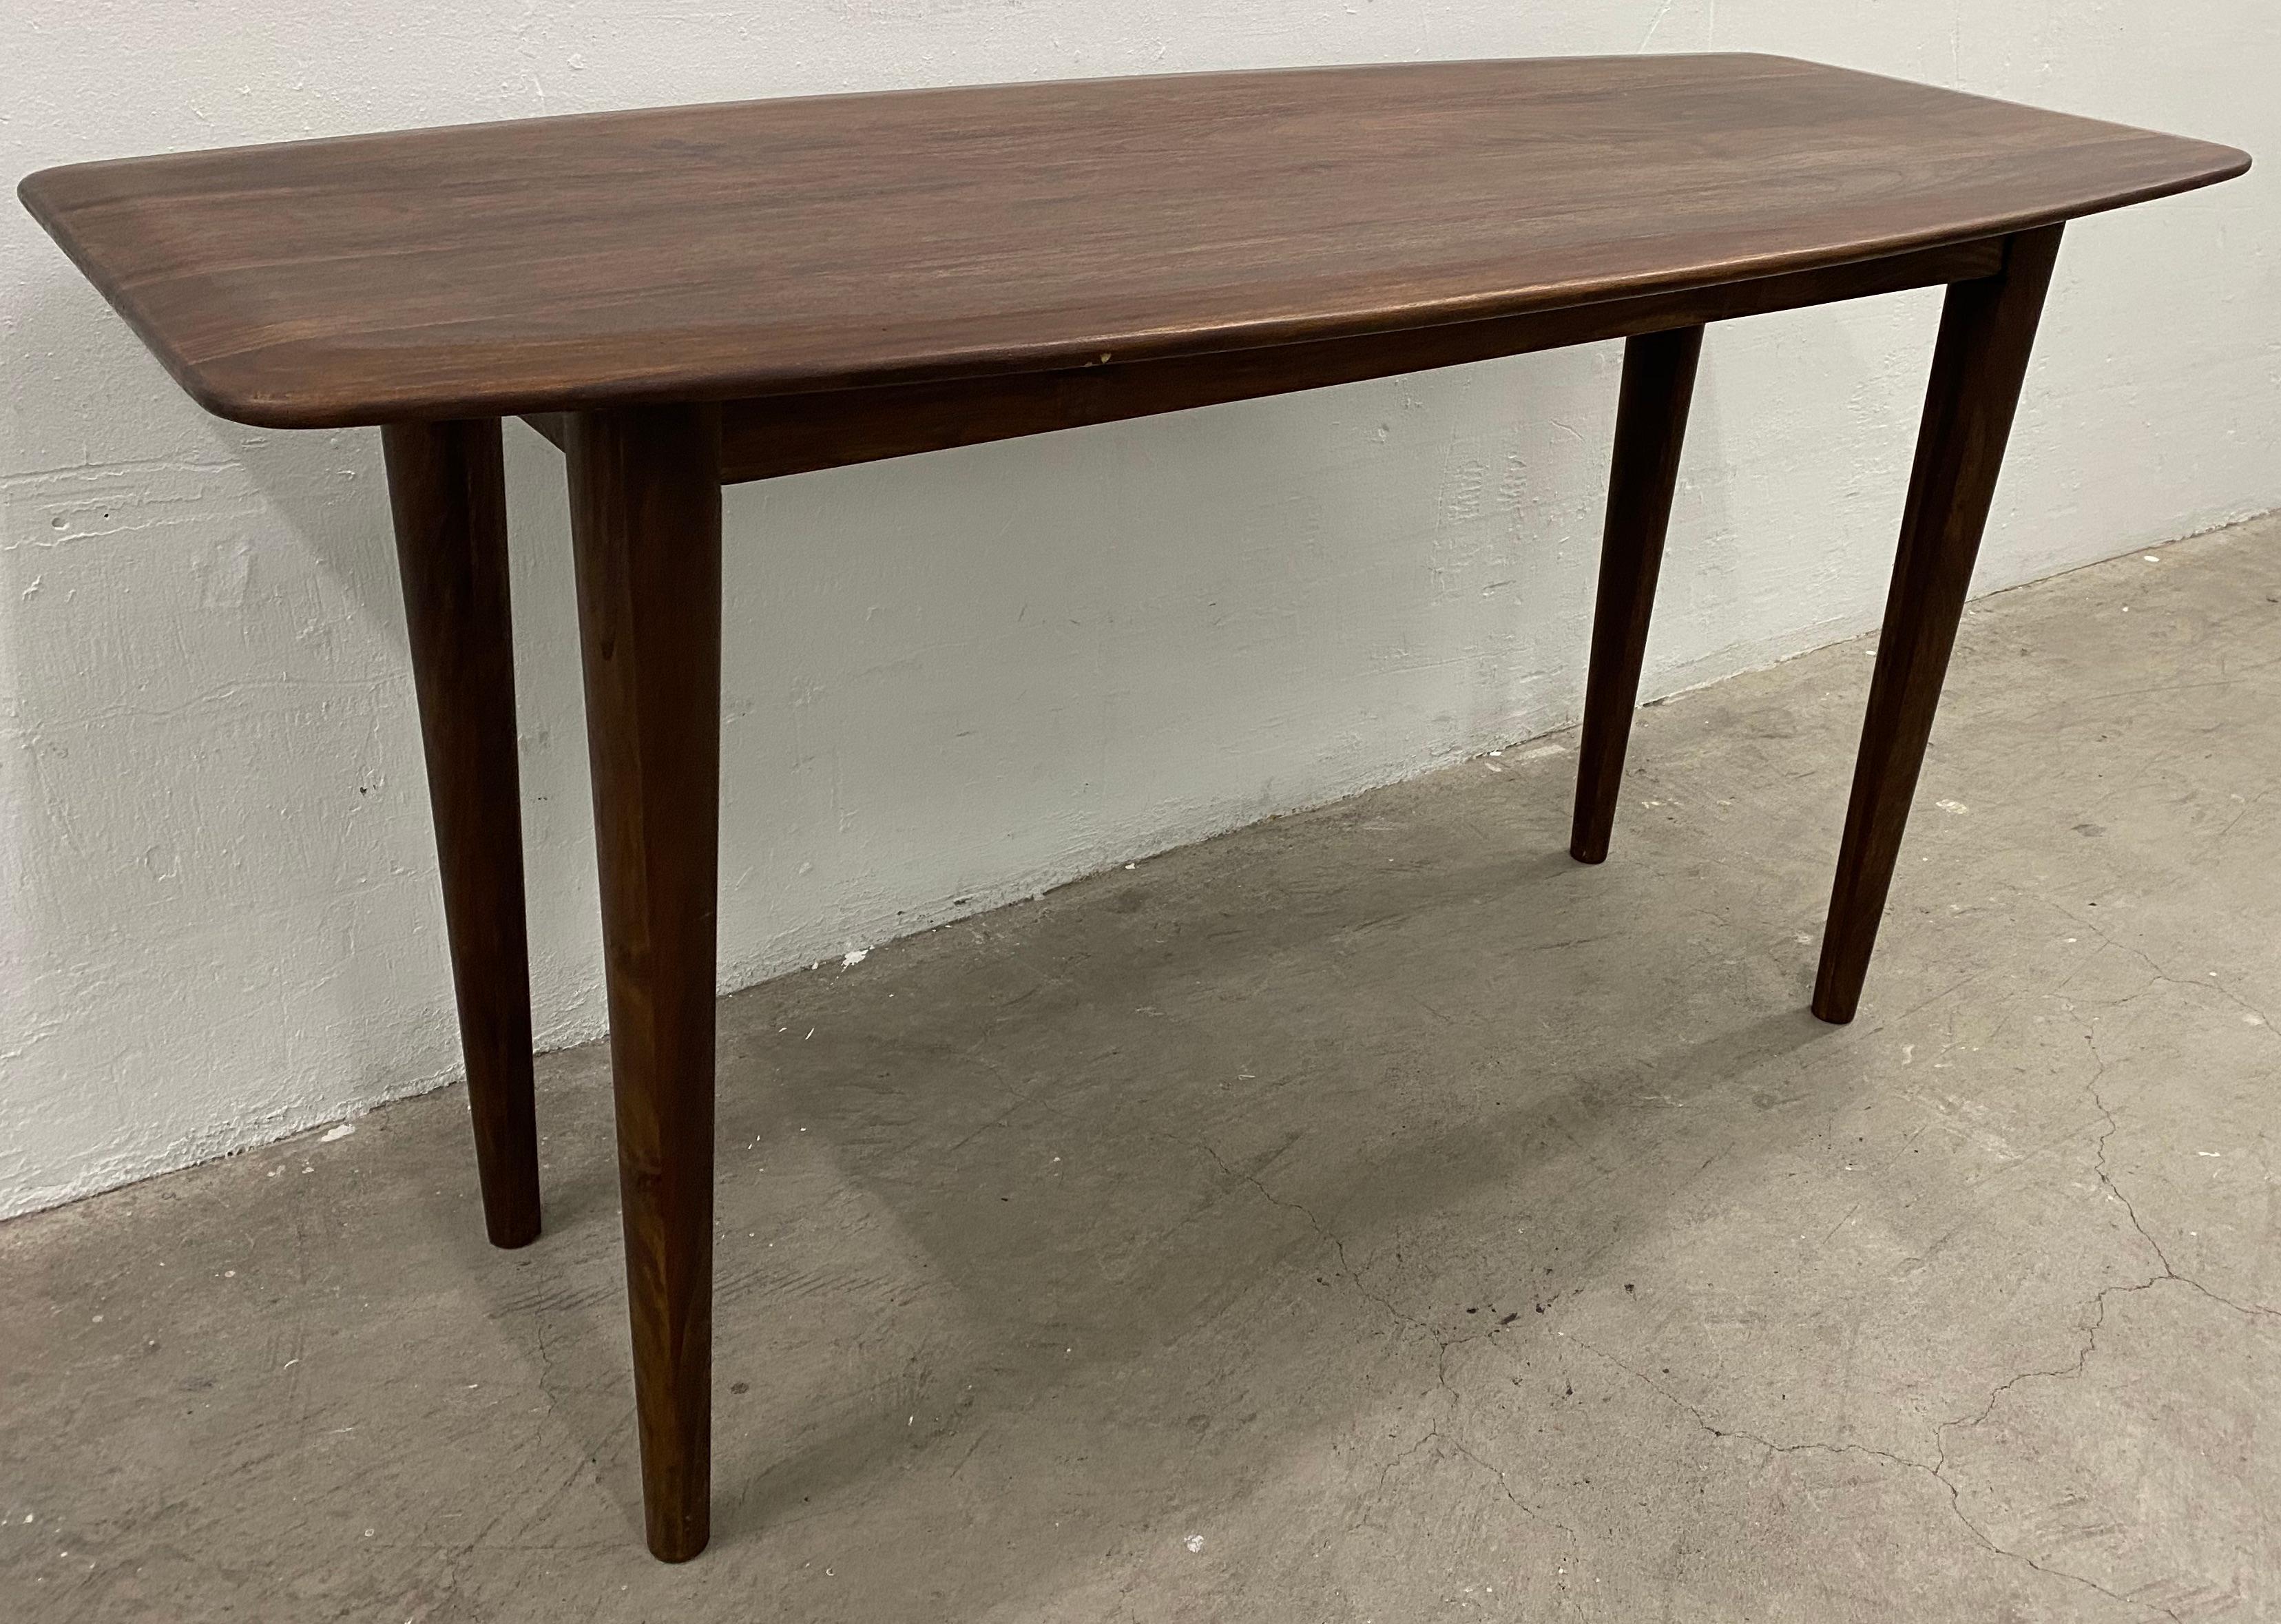 Contemporary walnut table for console dining or desk

Great dimensions for smaller dining spaces

This will also make a fine desk or console table

Dimensions 56